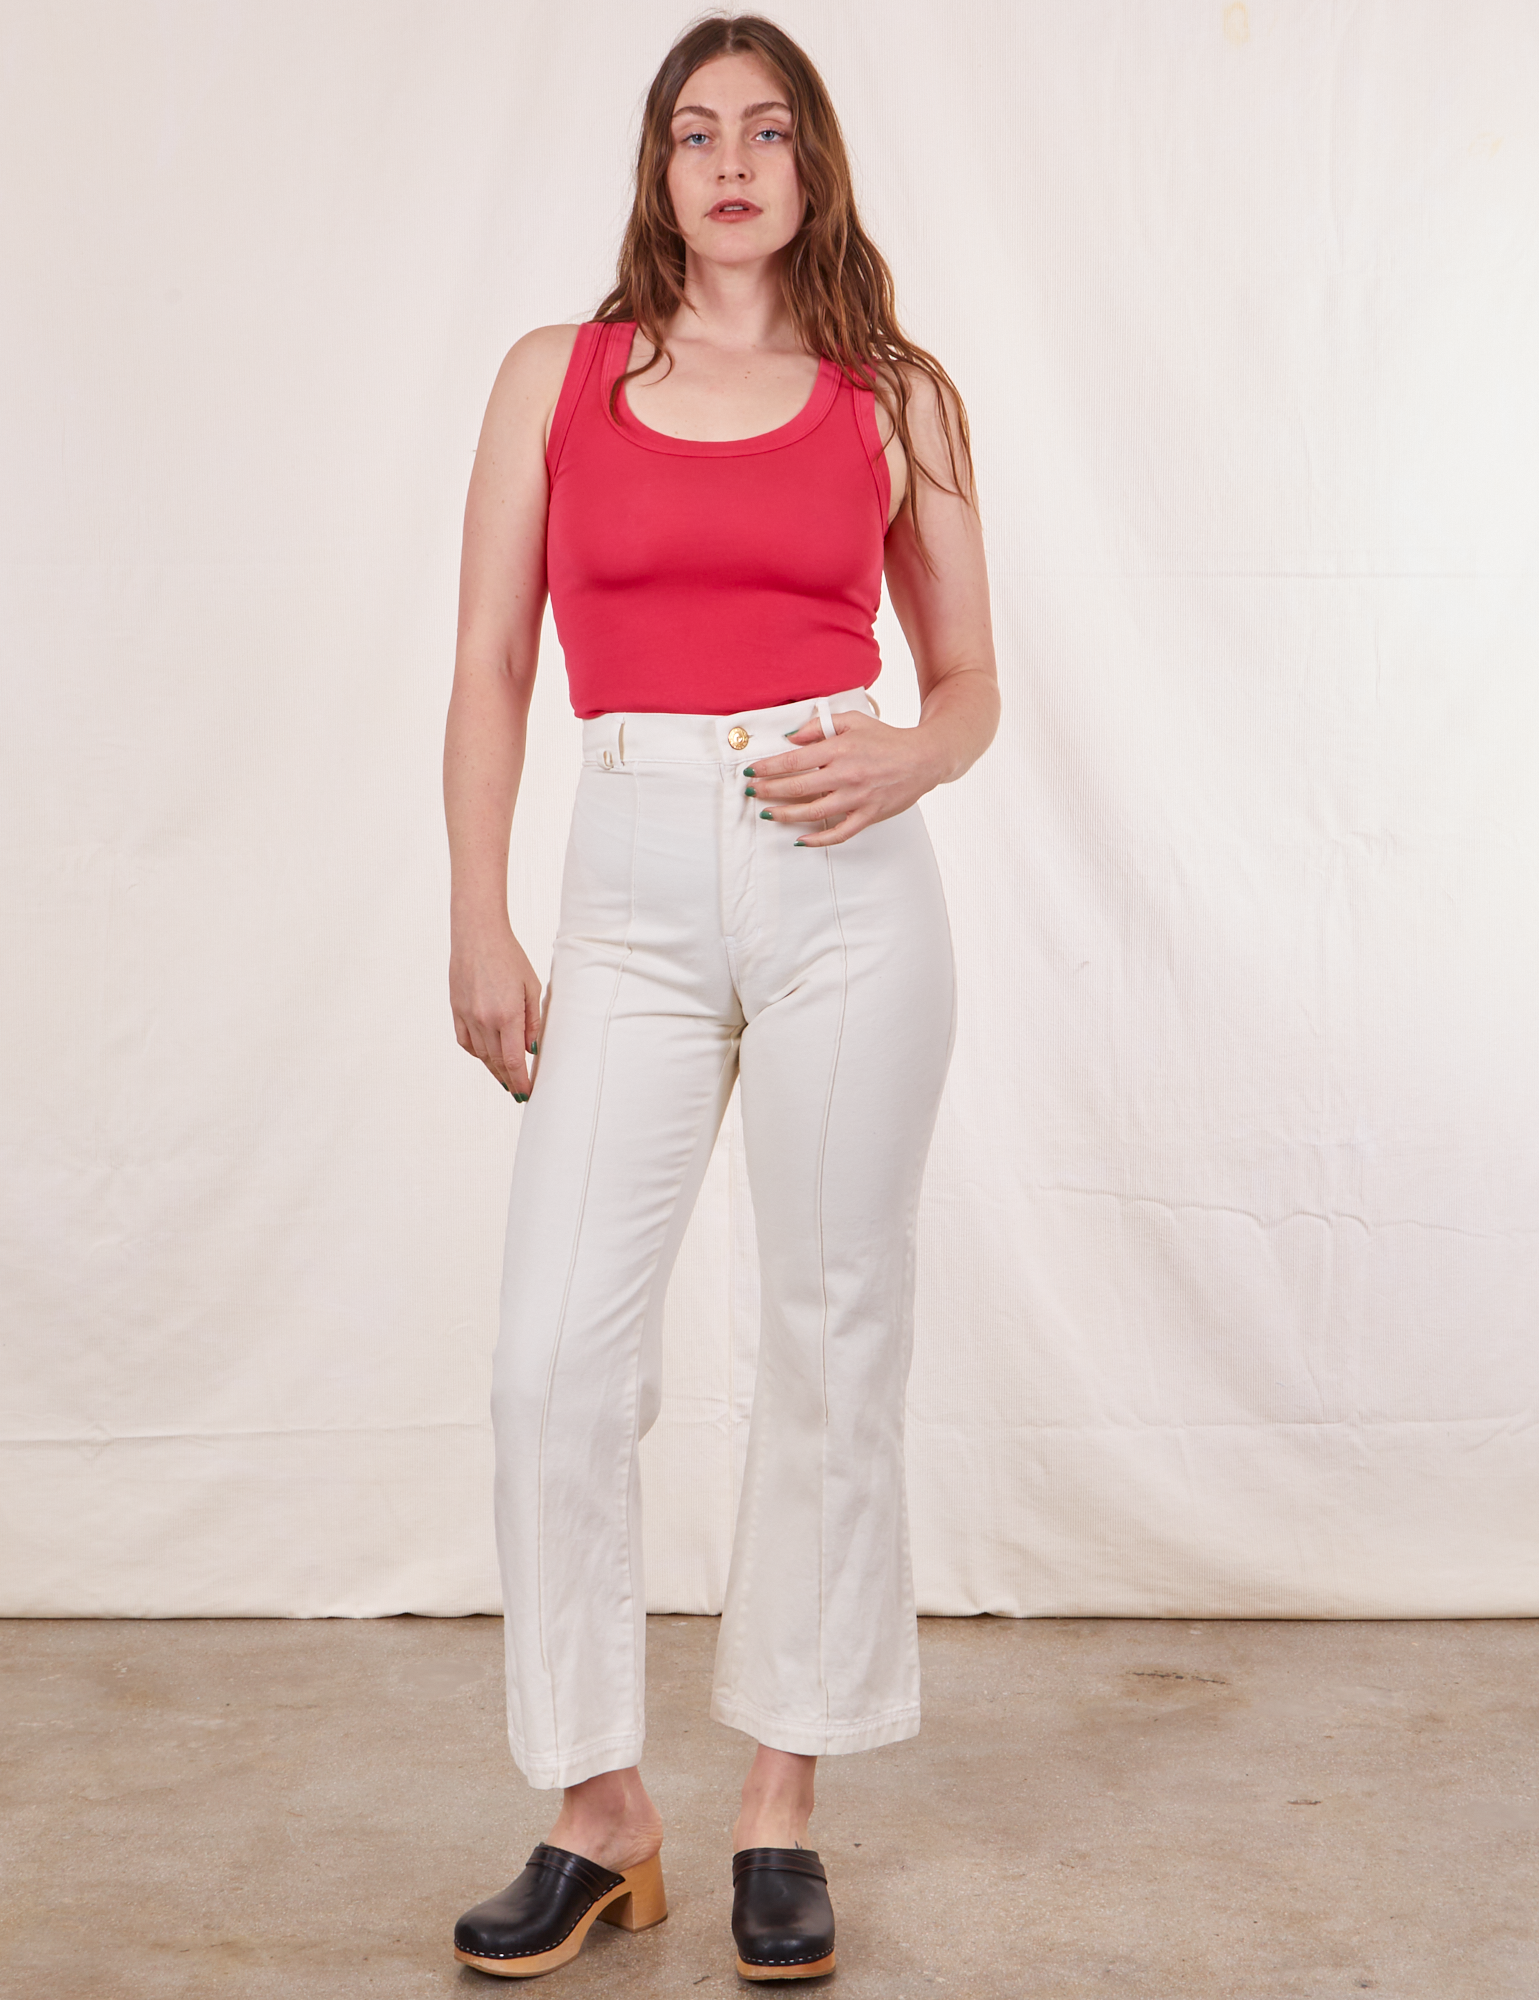 Allison is wearing Tank Top in Hot Pink and vintage off-white Western Pants